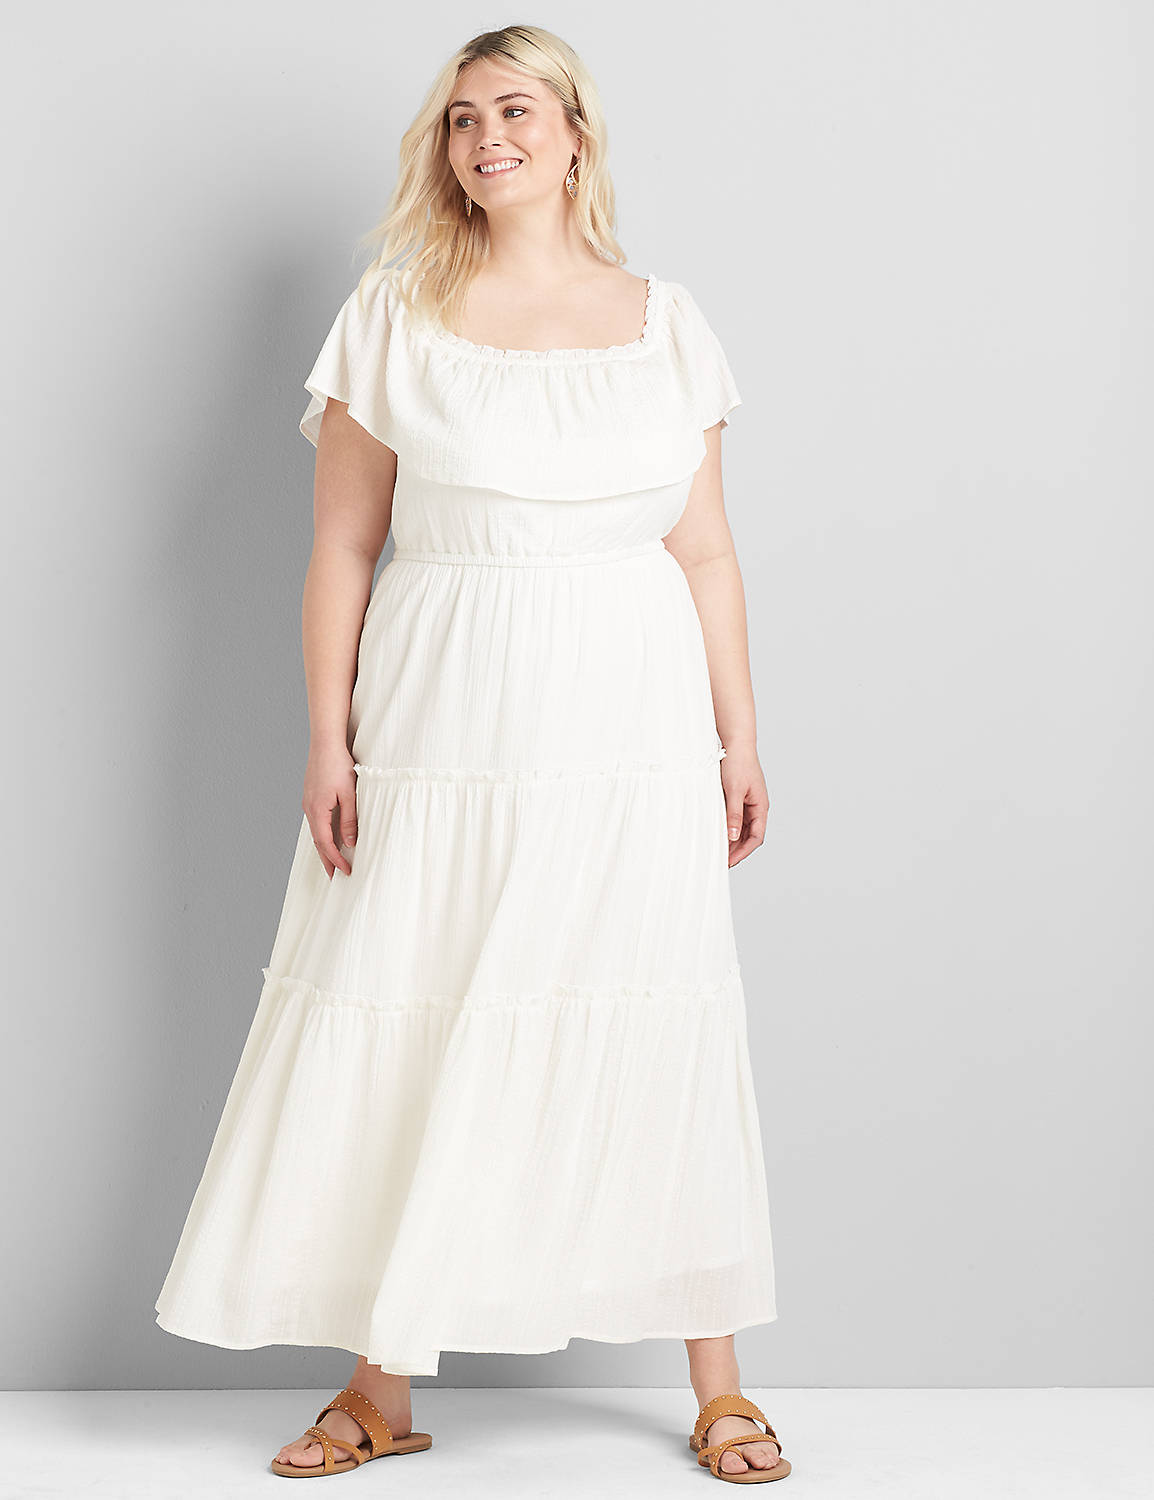 Short Sleeve Off The Shoulder Tiered Maxi 1120640:Ascena White:22/24 PETITE Product Image 3